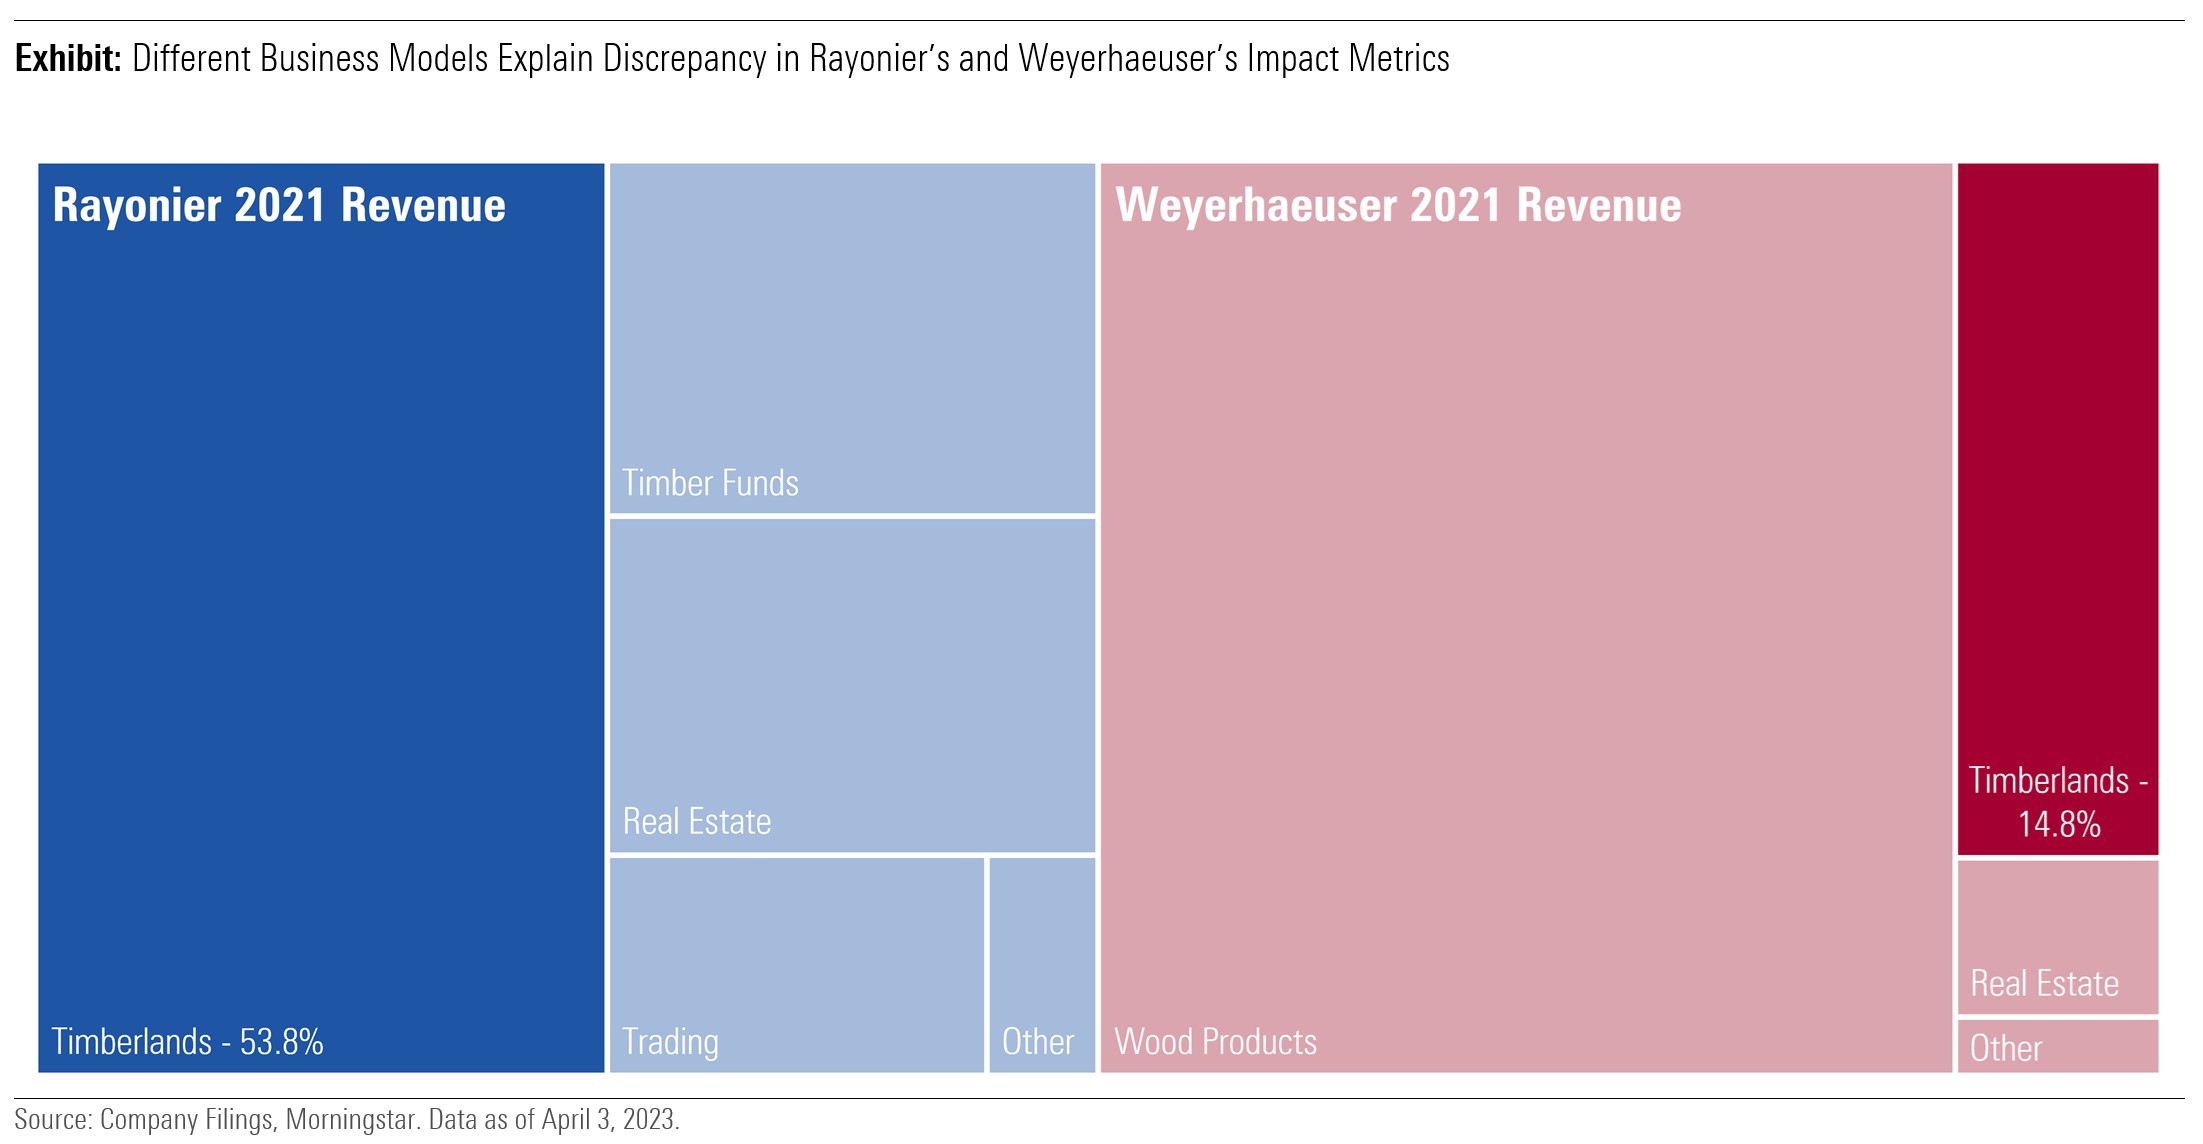 This graphic shows that the revenue contribution from timberlands to Rayonier's and Weyerhaeuser's 2021 revenue was substantially different - 53.8% for Rayonier and 14.8% for Weyerhaeuser.